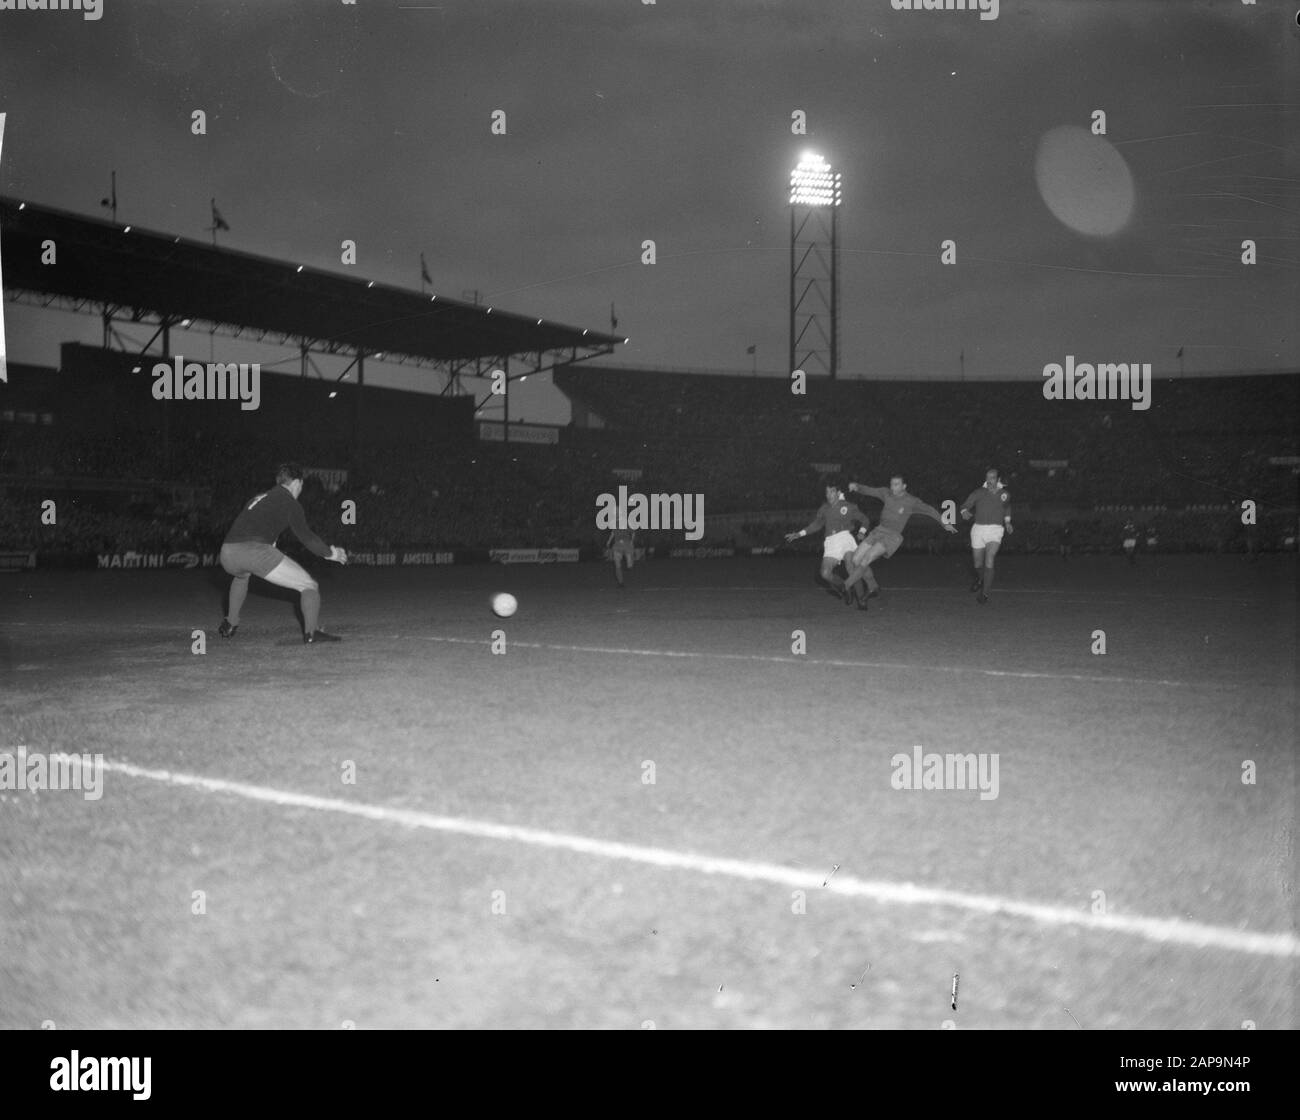 Benfica versus Real Madrid (Final European Cup I in Amsterdam) 5-3 first goal for Real Madrid dppr Puskas Date: May 2, 1962 Location: Amsterdam, Noord-Holland Keywords: sport, football Personal name: Puskas, Ferenc Stock Photo